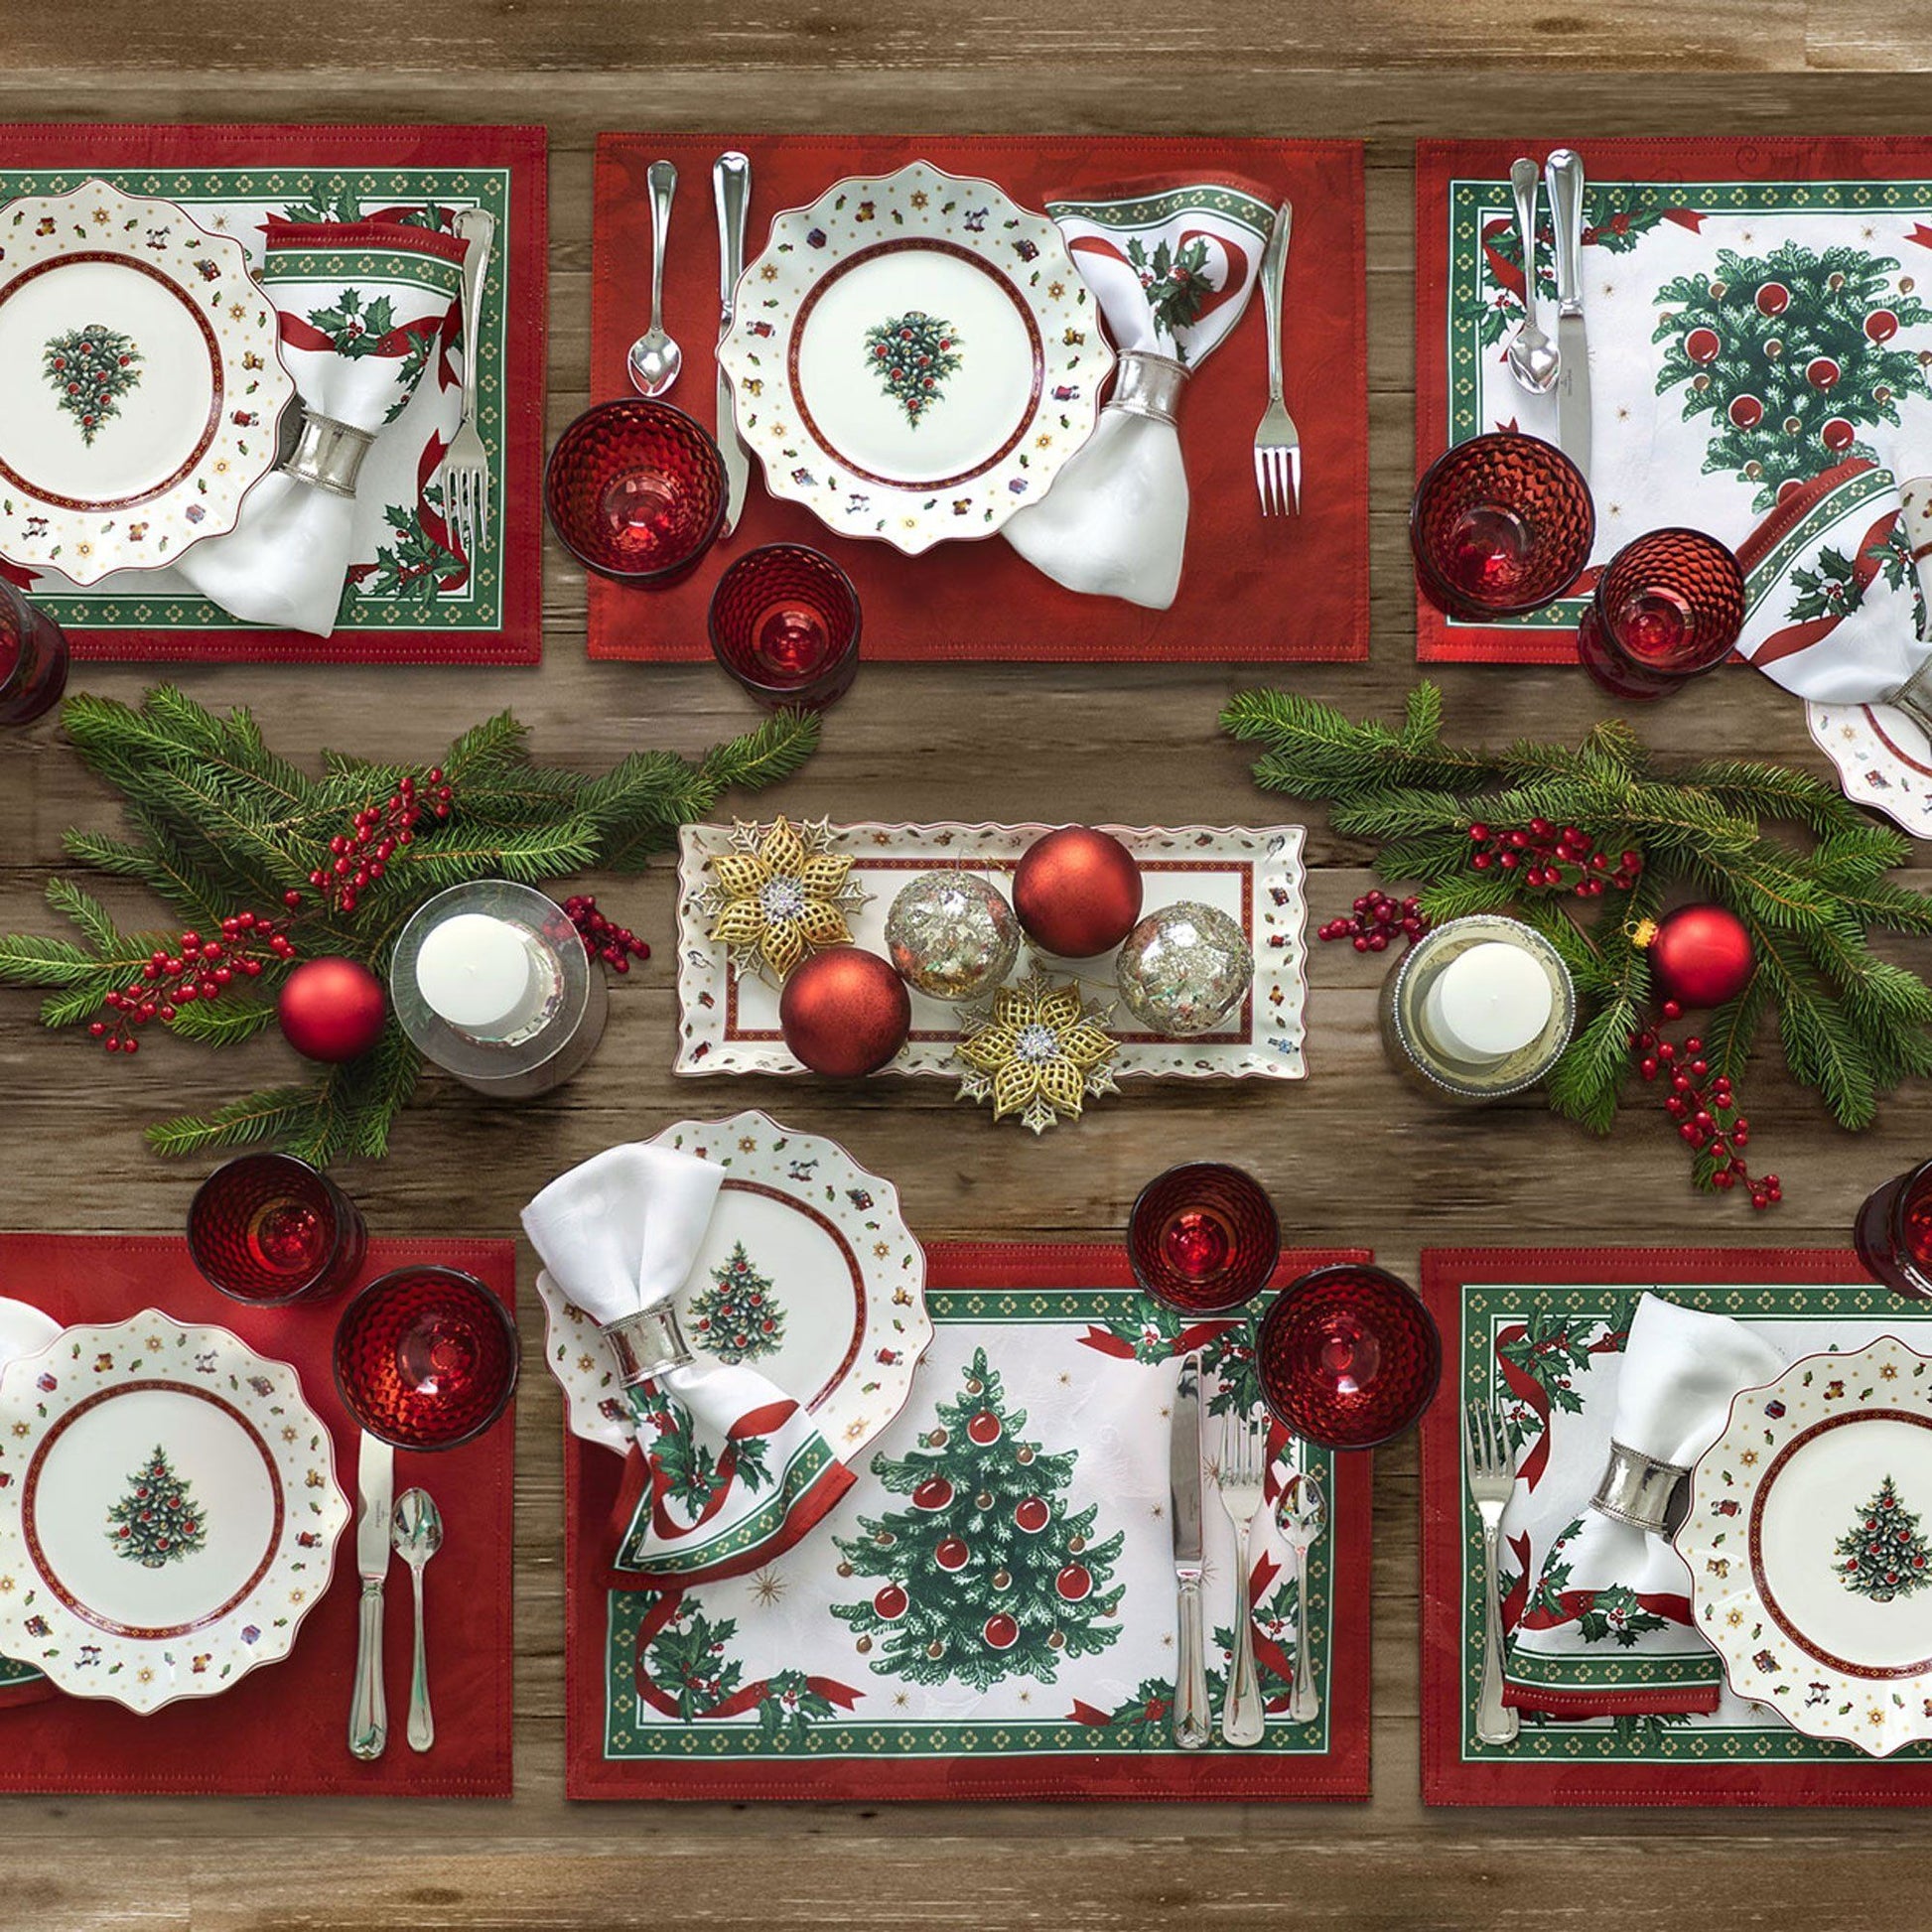 White holly damasks napkin set of 4 with red/green border and red ribbon design trim with holly sprigs on table